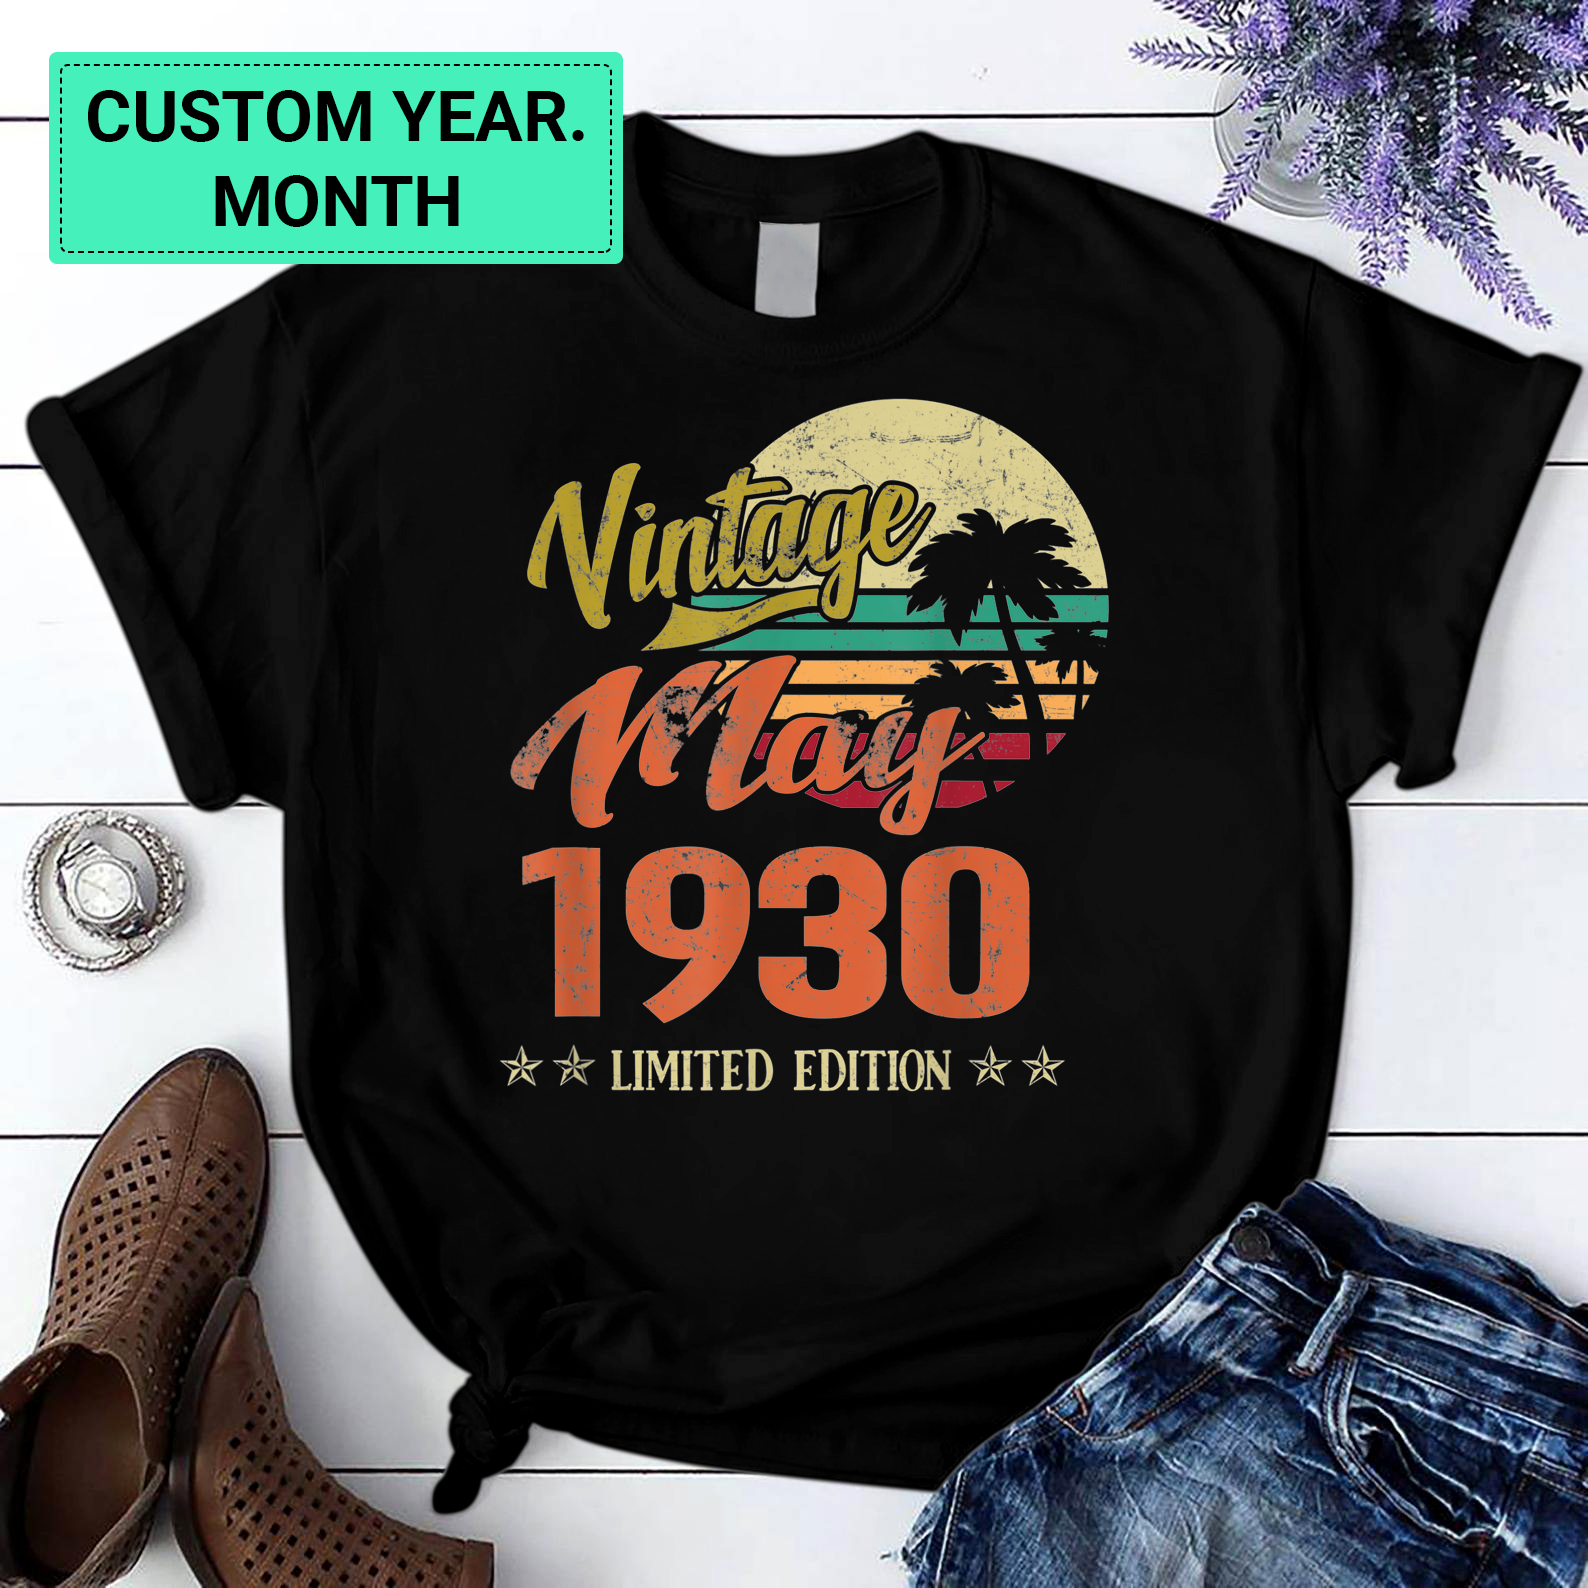 Personalization Birthday 365 Vintage May 1930 Limited Edition Birthday Gift T Shirt Black S-6Xl